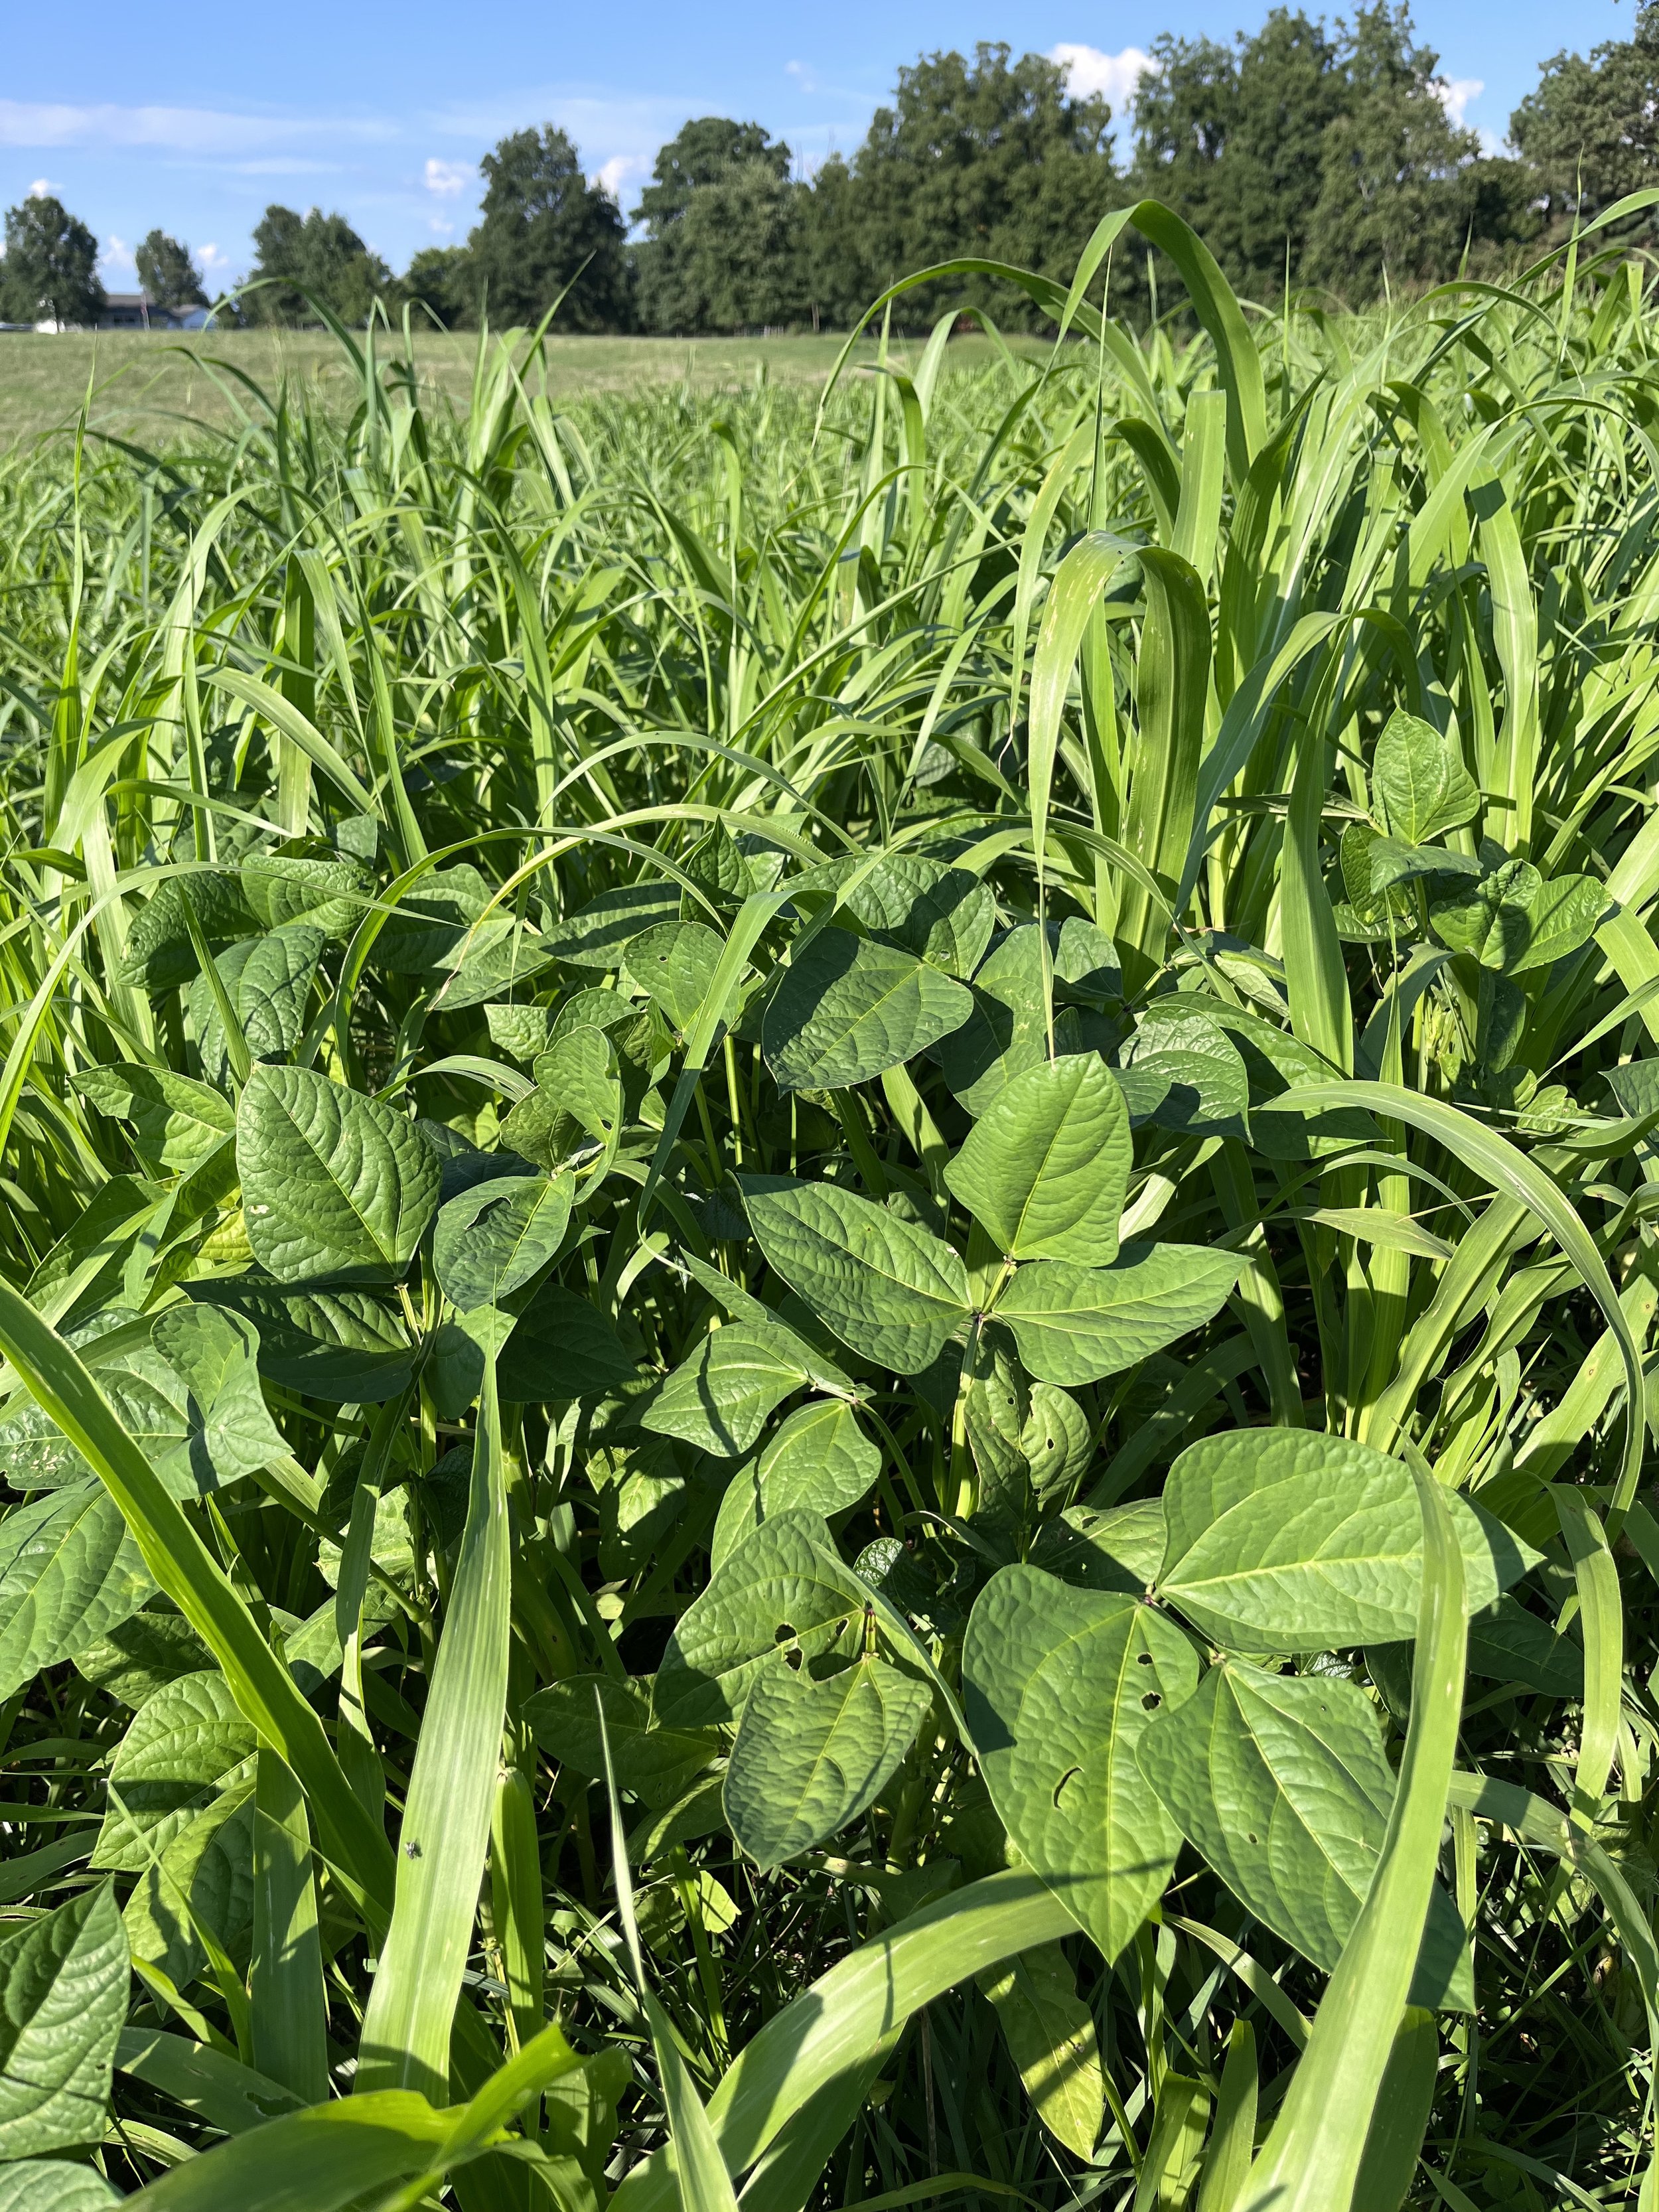 August 18 - Pearl Millet and Cow Peas growing together